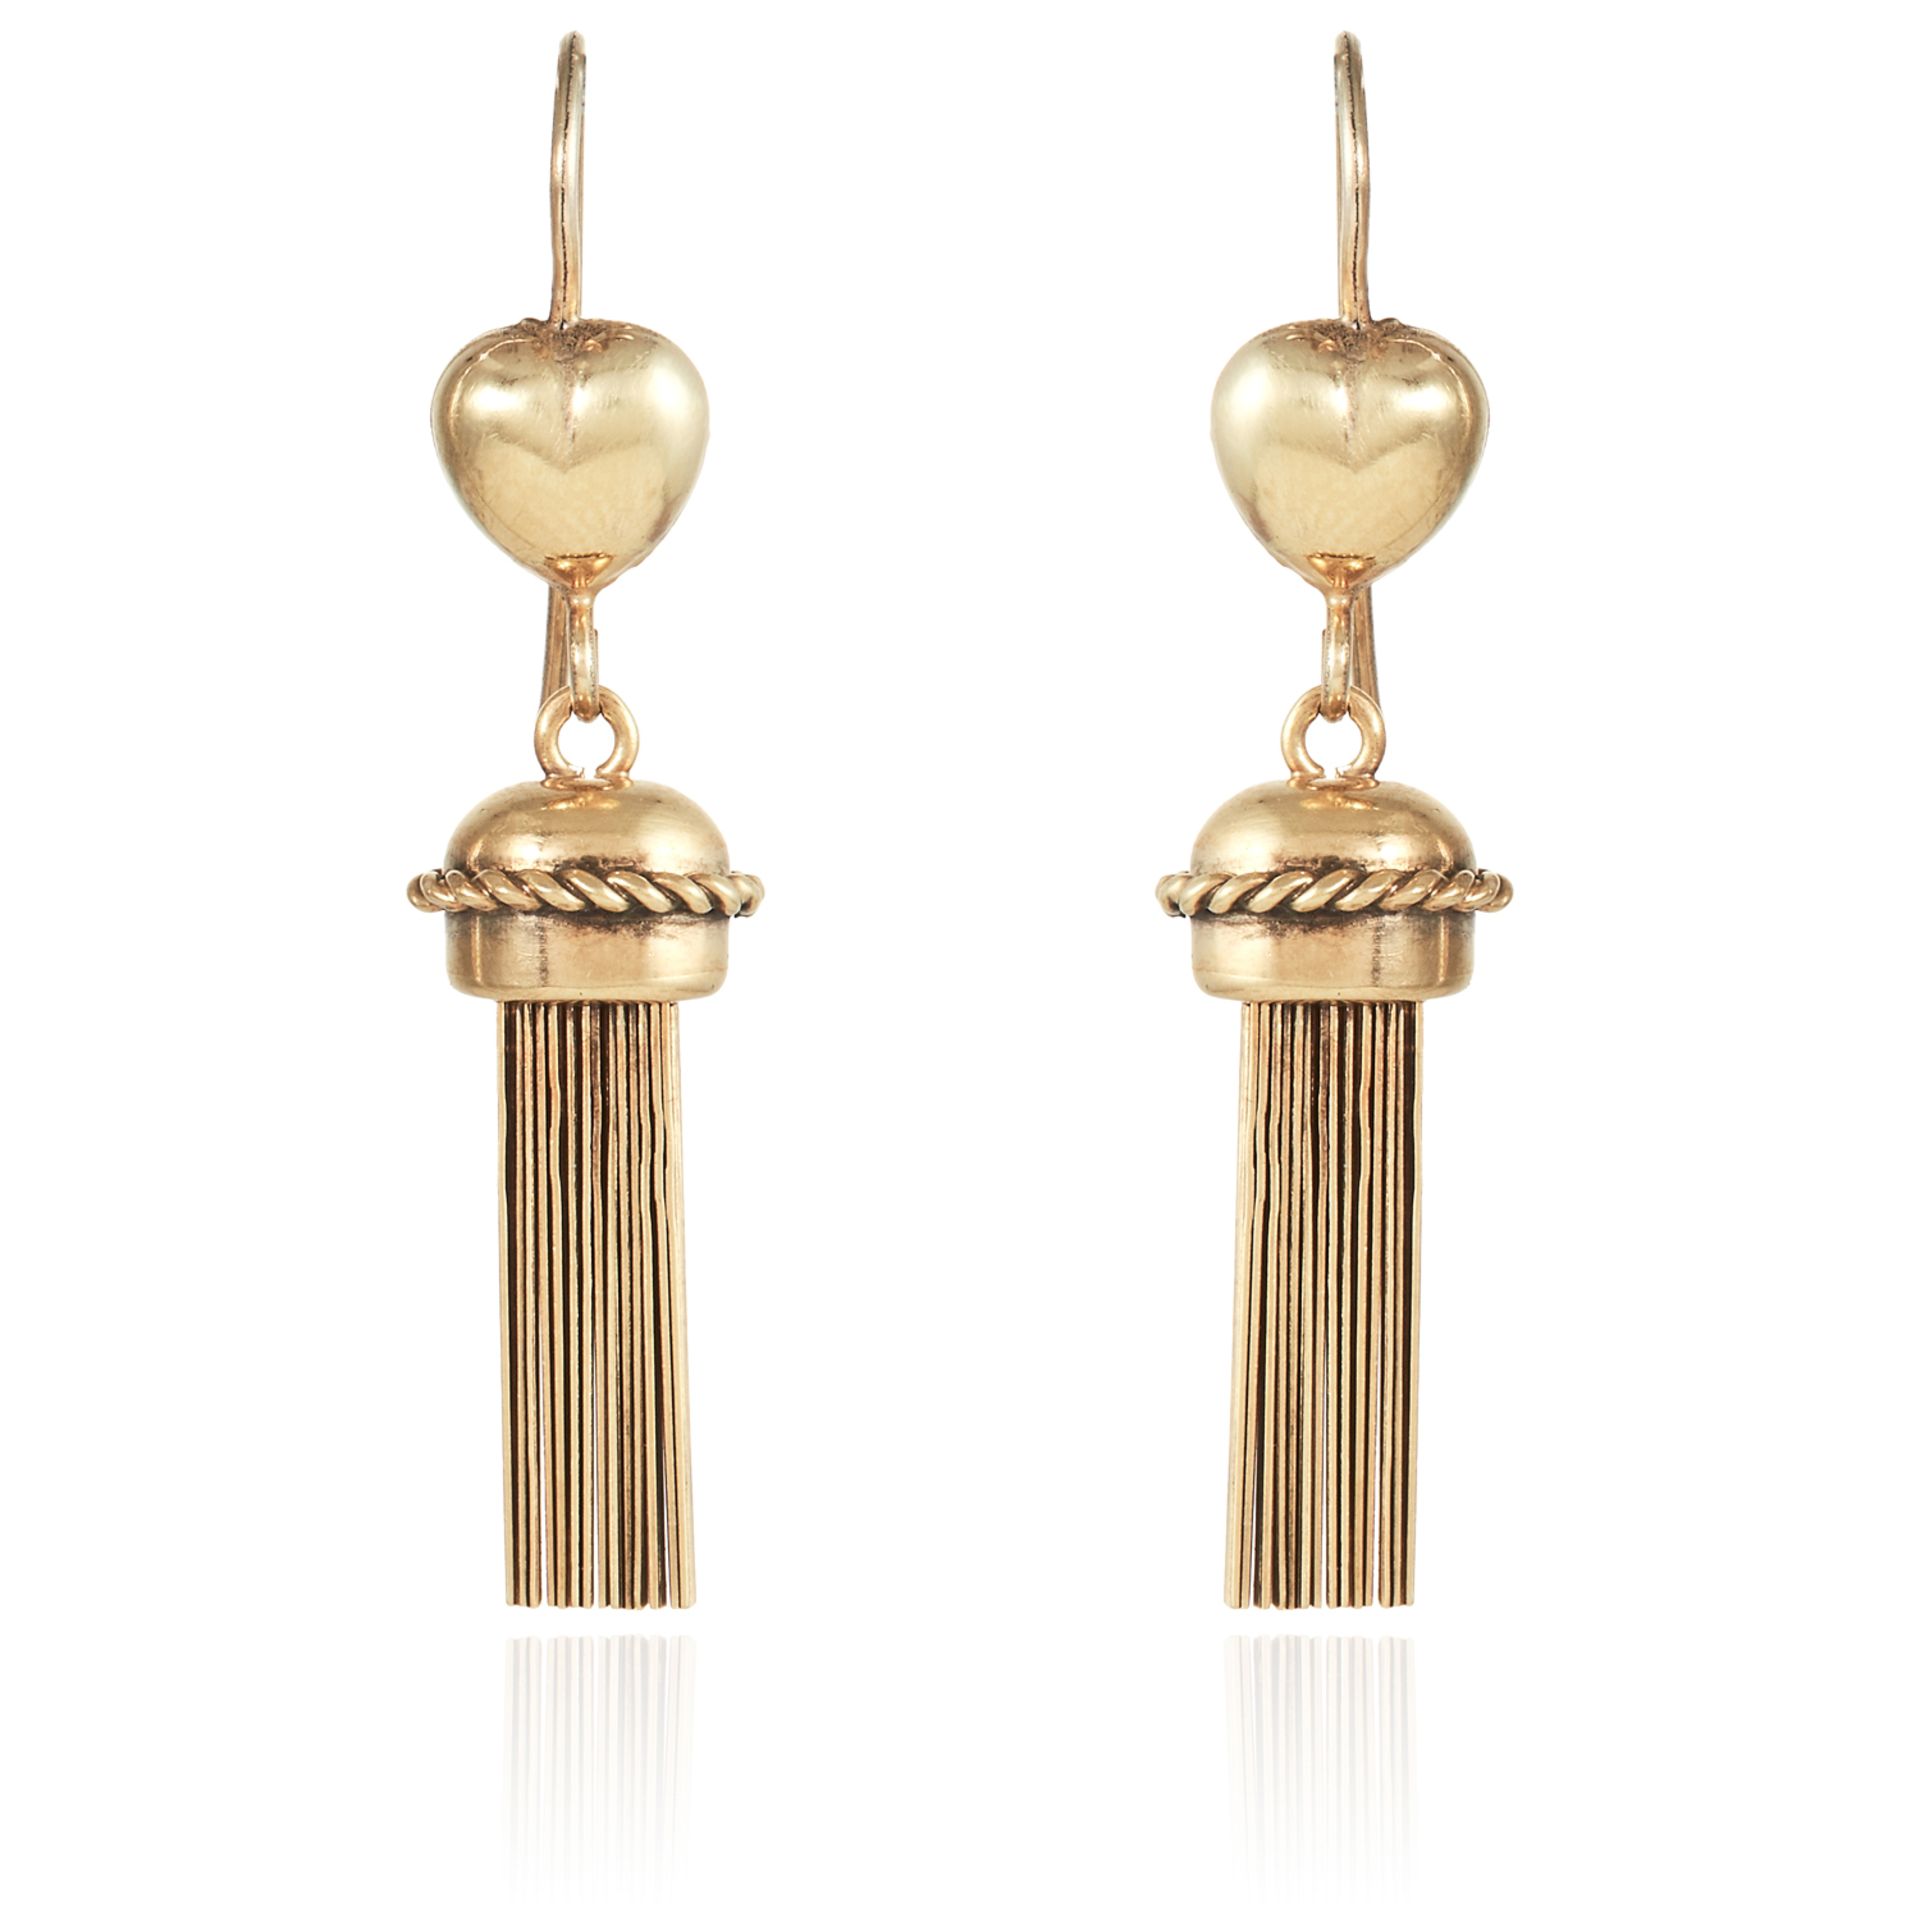 A PAIR OF ANTIQUE TASSEL DROP EARRINGS, 19TH CENTURY in yellow gold, each designed with a heart